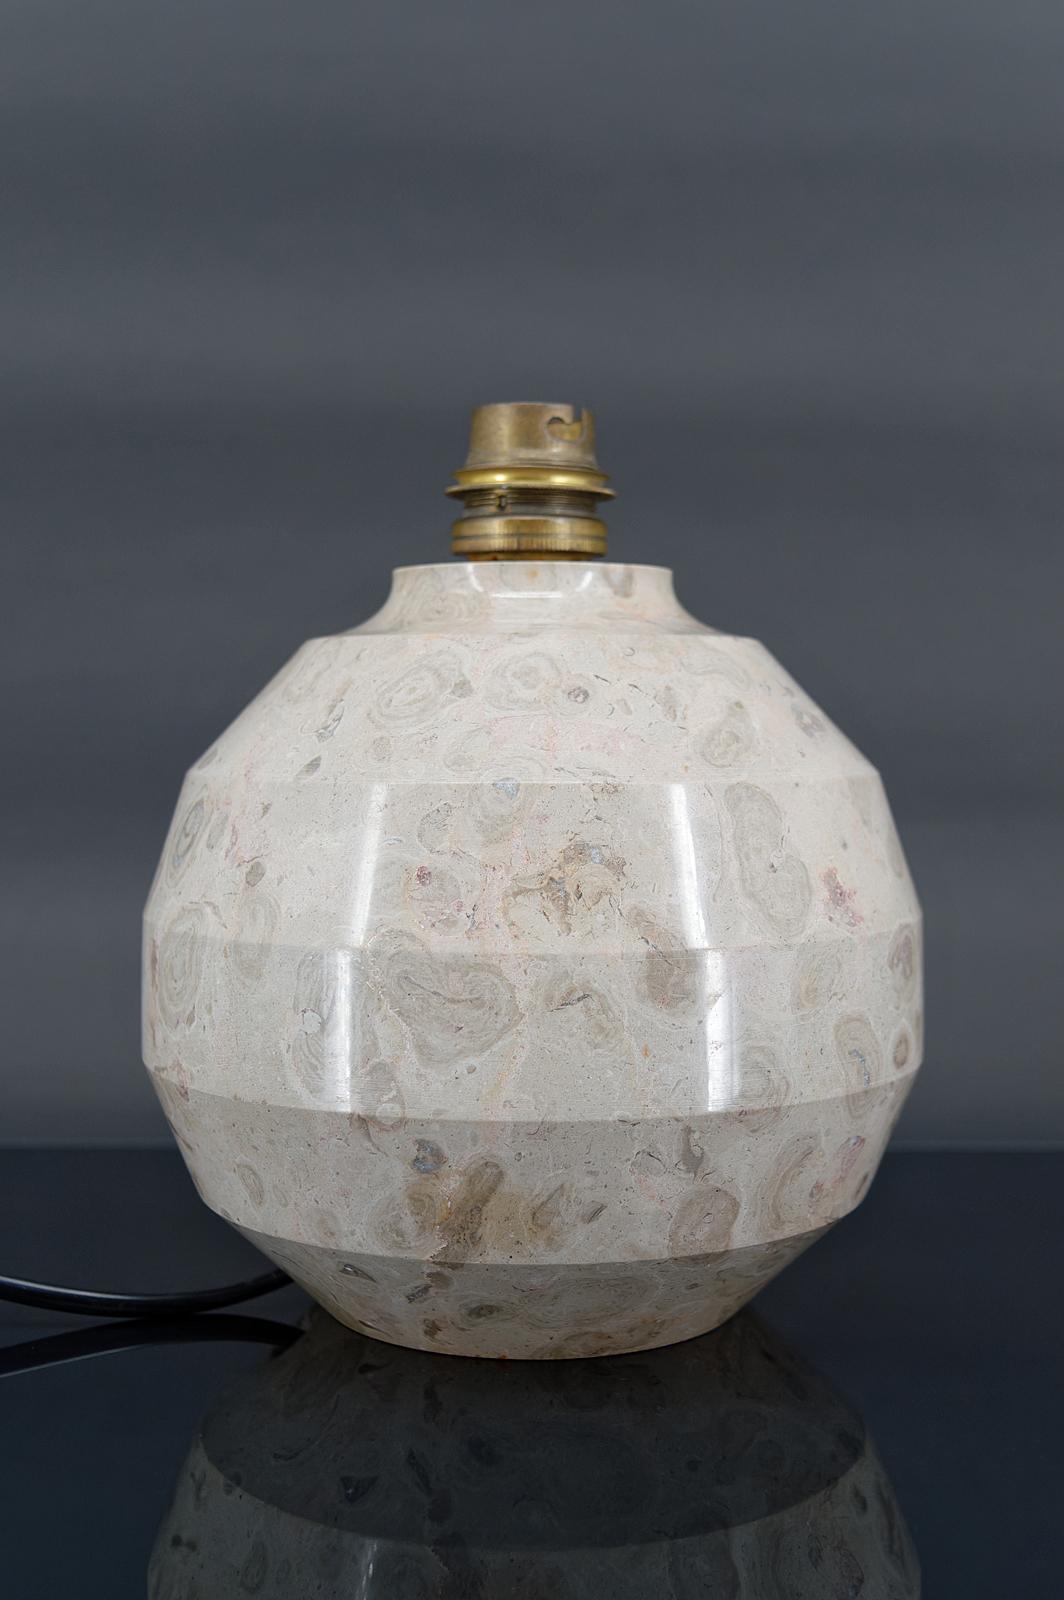 Modernist Art Deco ball lamp in carved marble.

France, Circa 1930

In excellent condition, new electricity.

Dimensions:
height 17 cm
diameter 16 cm